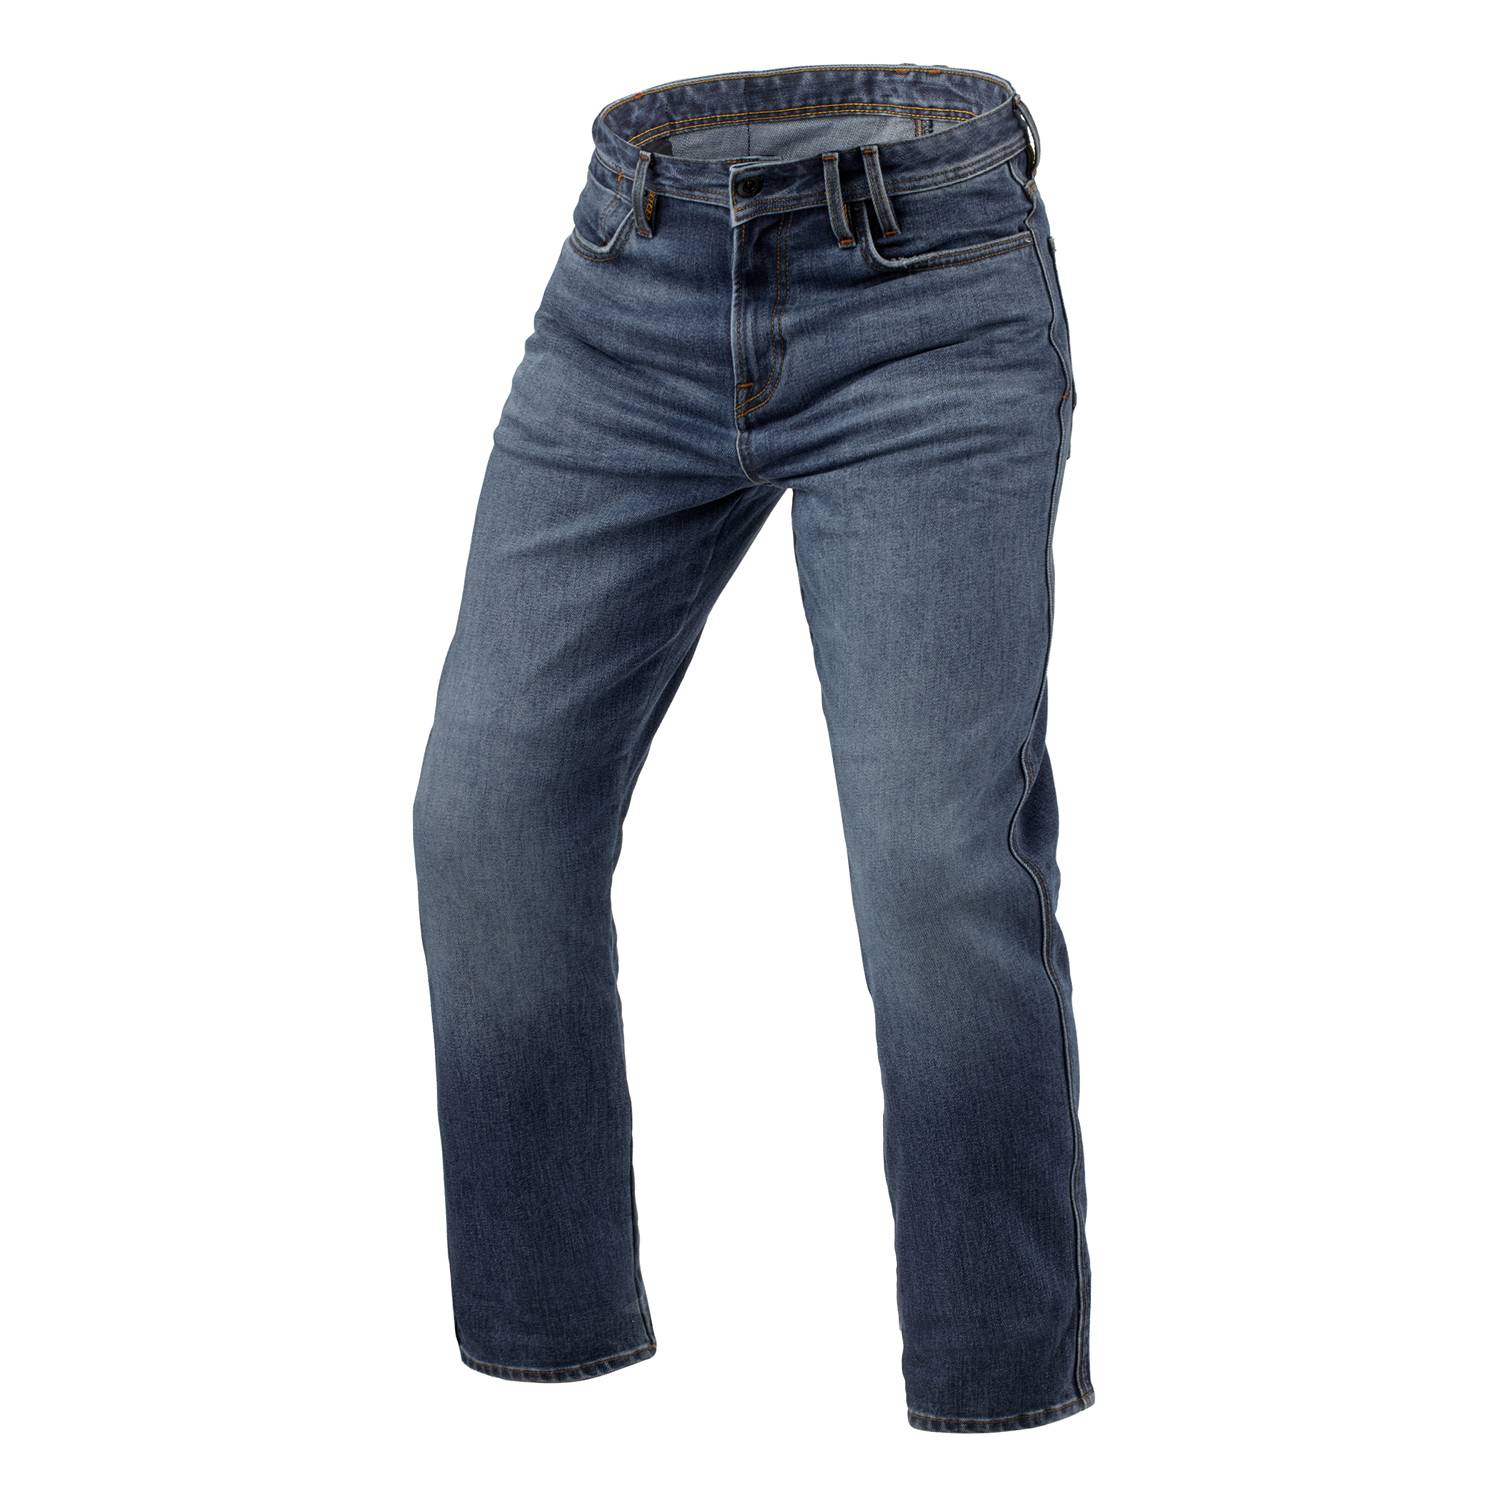 Image of REV'IT! Jeans Lombard 3 RF Medium Blue Stone L34 Motorcycle Jeans Taille L34/W33